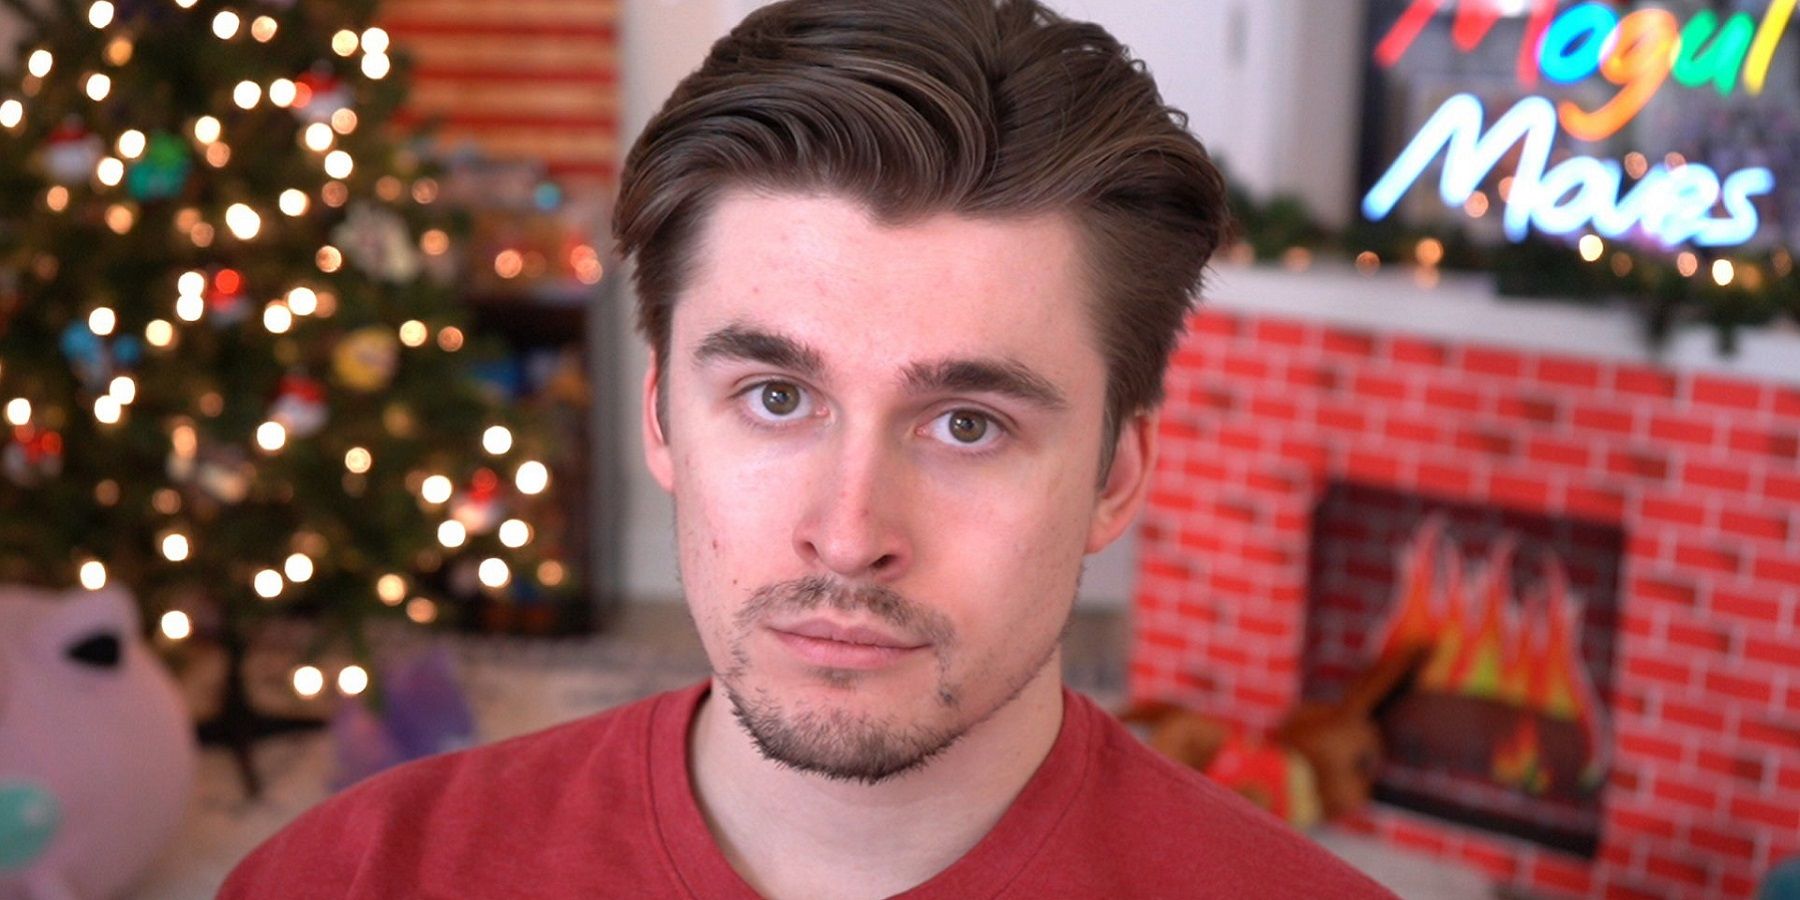 A photo of Twitch streamer and YouTuber Ludwig in front of Christmas decorations.